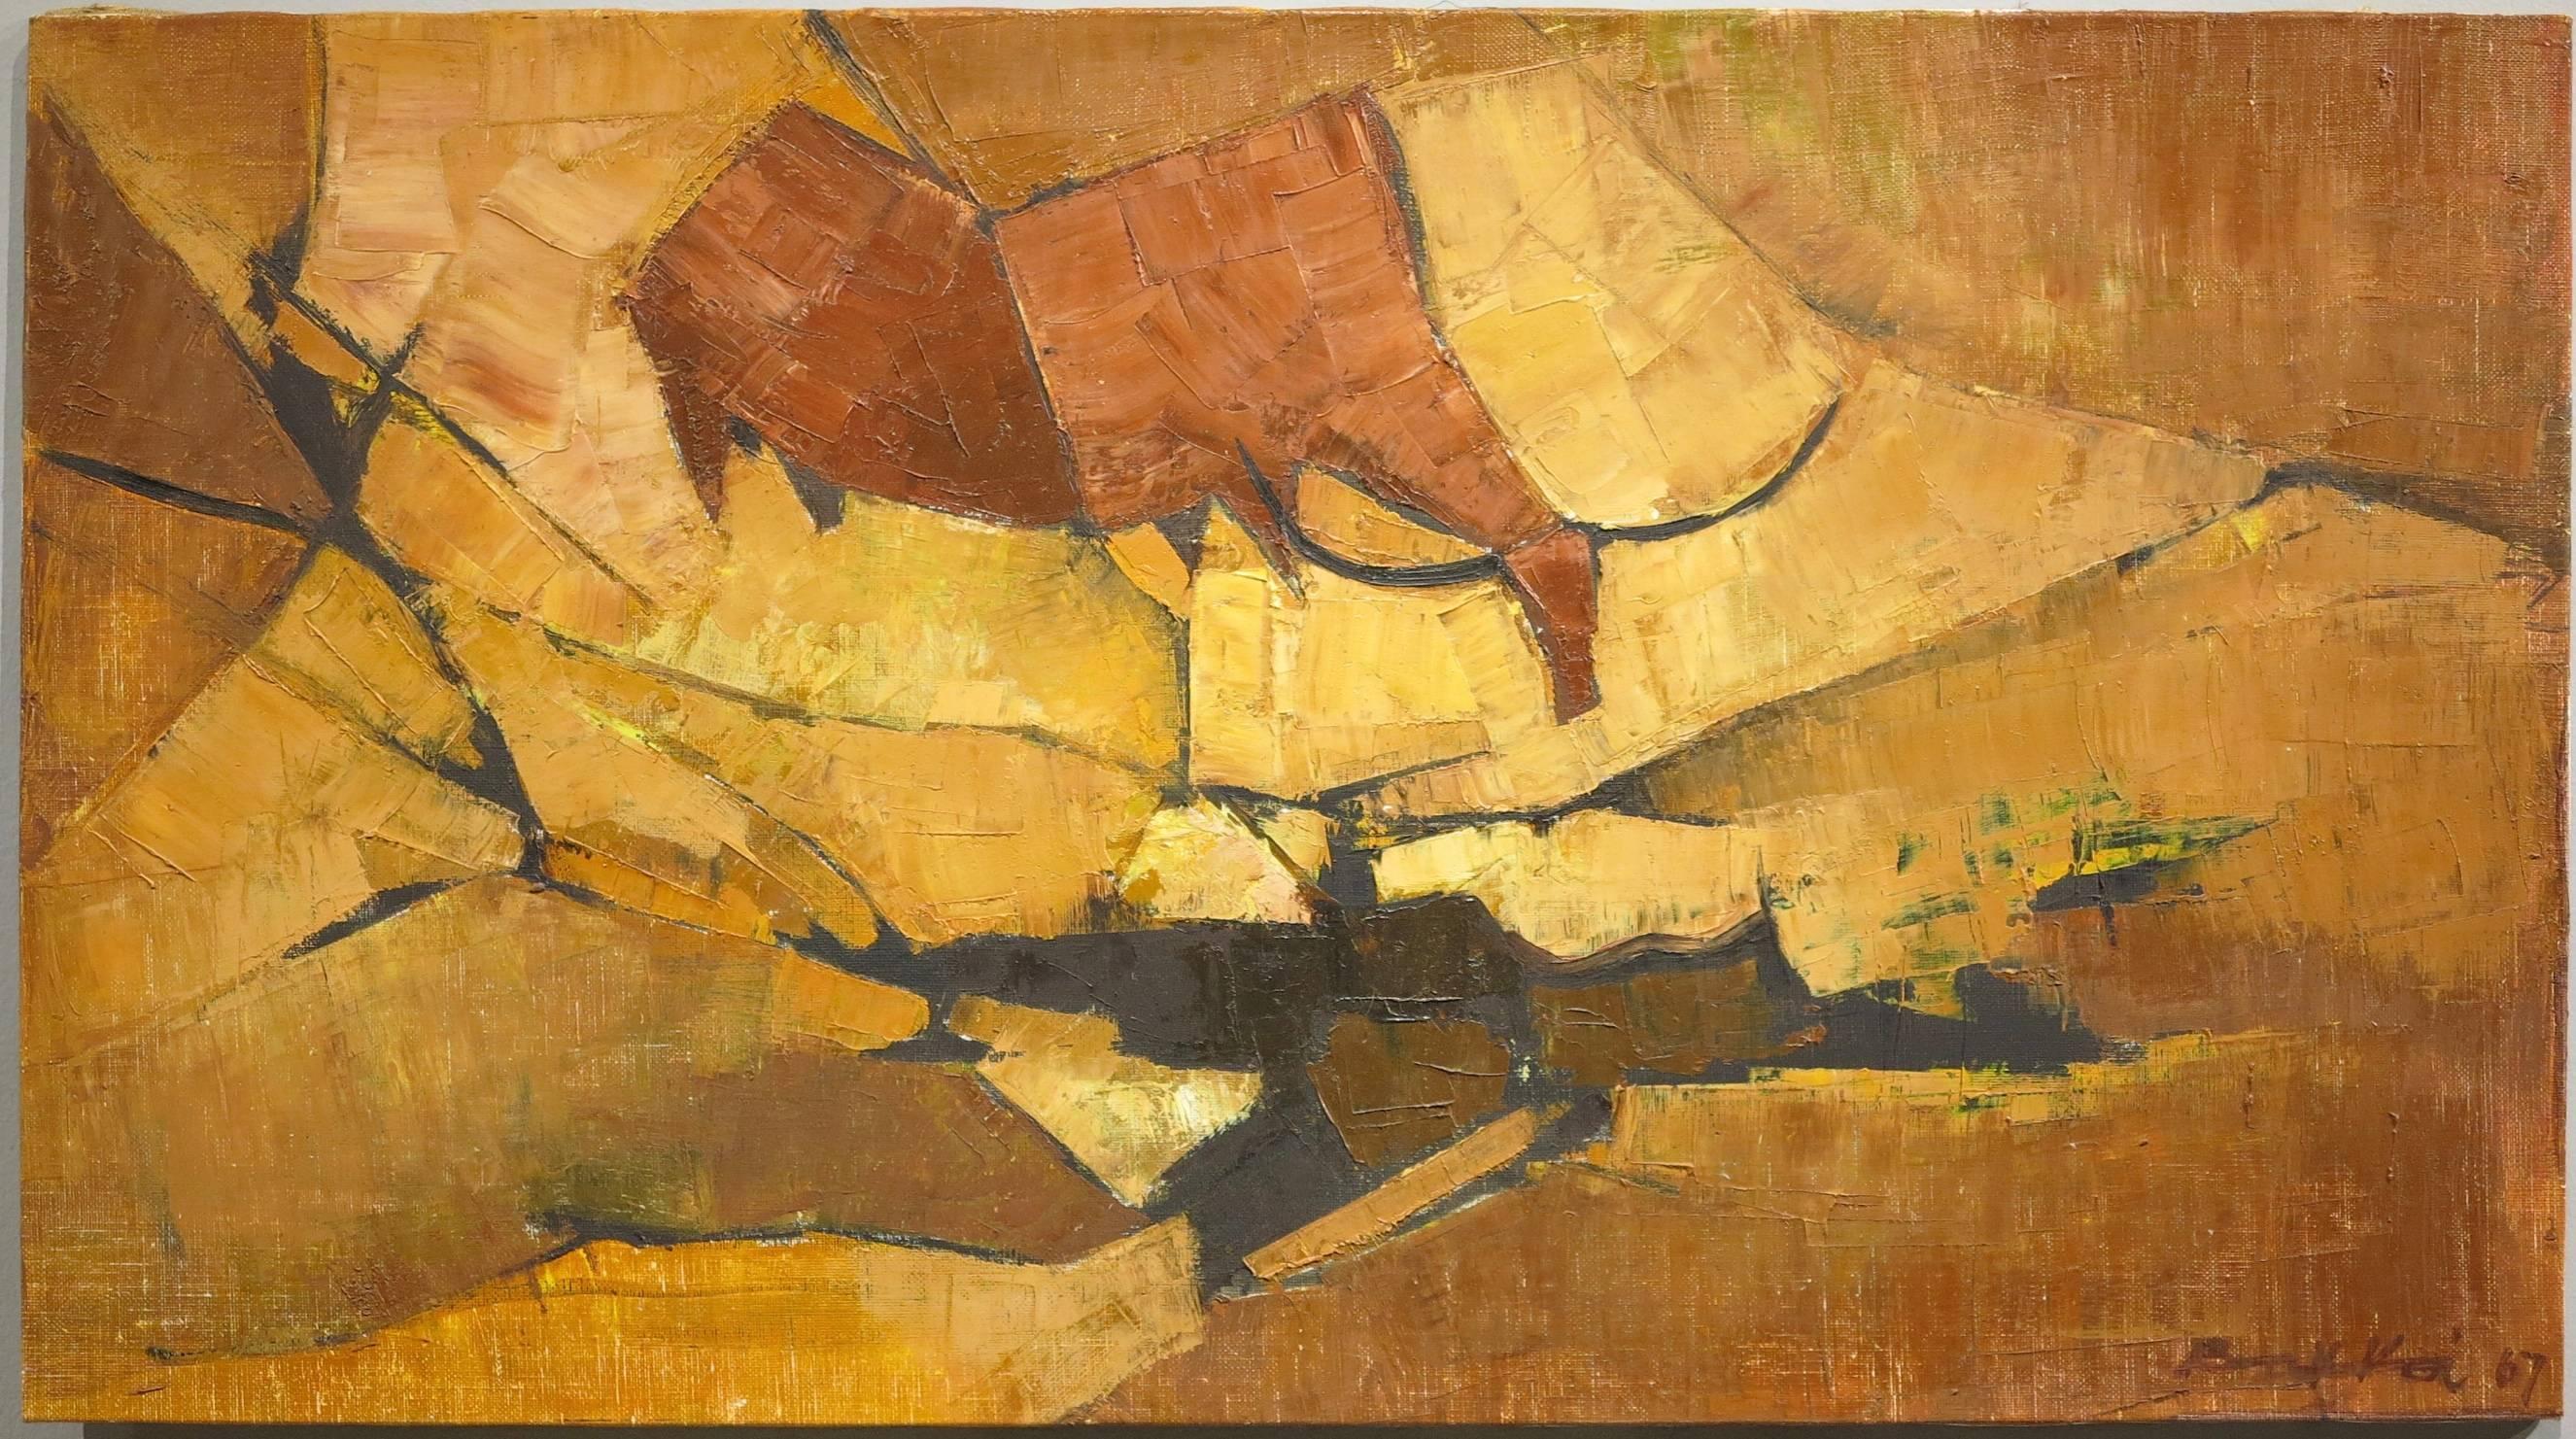 Tay Bak Koi Abstract Painting - Cow #2 (abstract modernist cubist Asian Singaporean landscape painting)